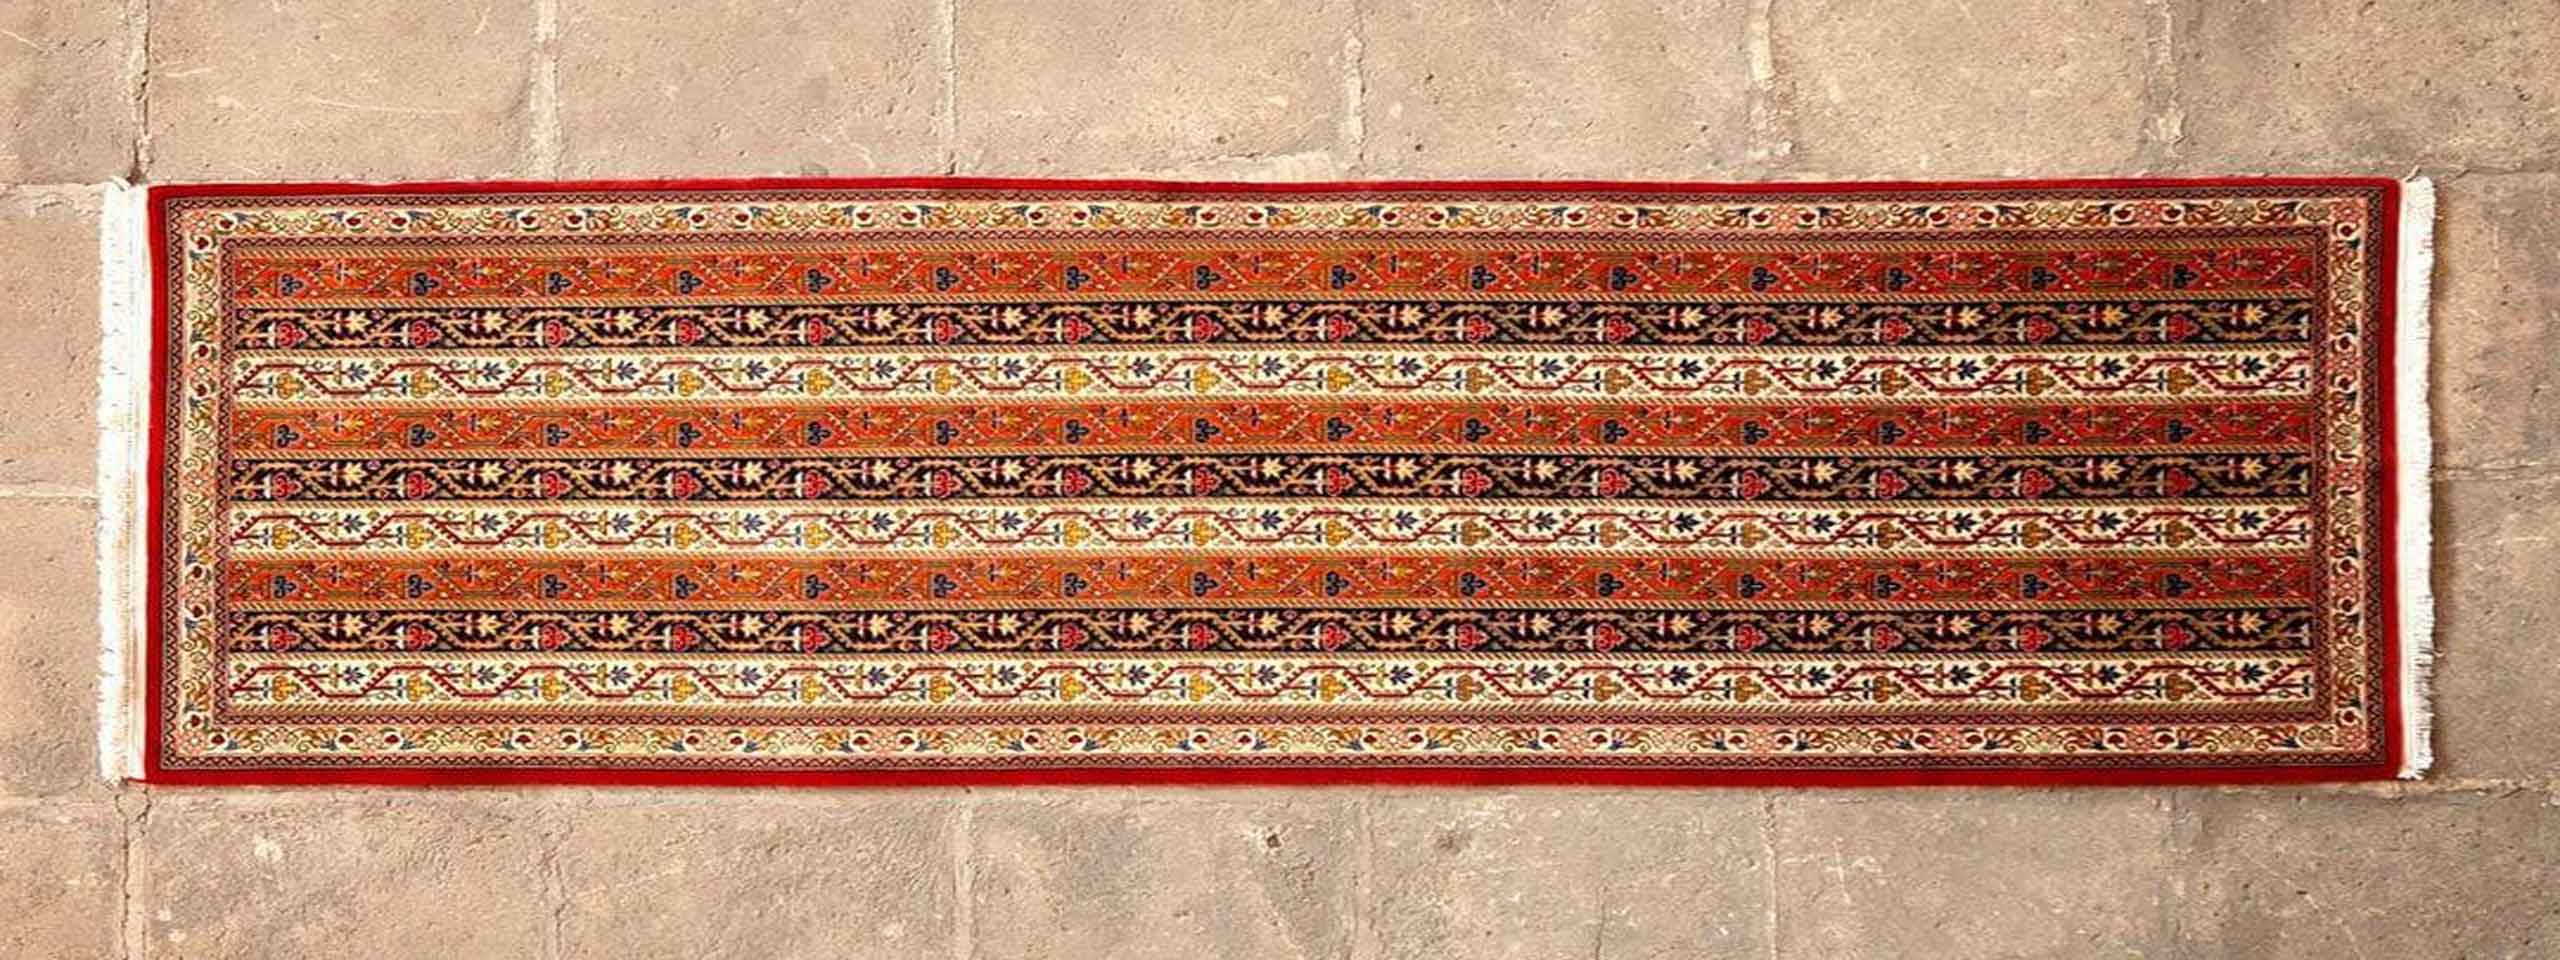 Persian runner rug: 4 spaces that you can use Persian runner rugs in them